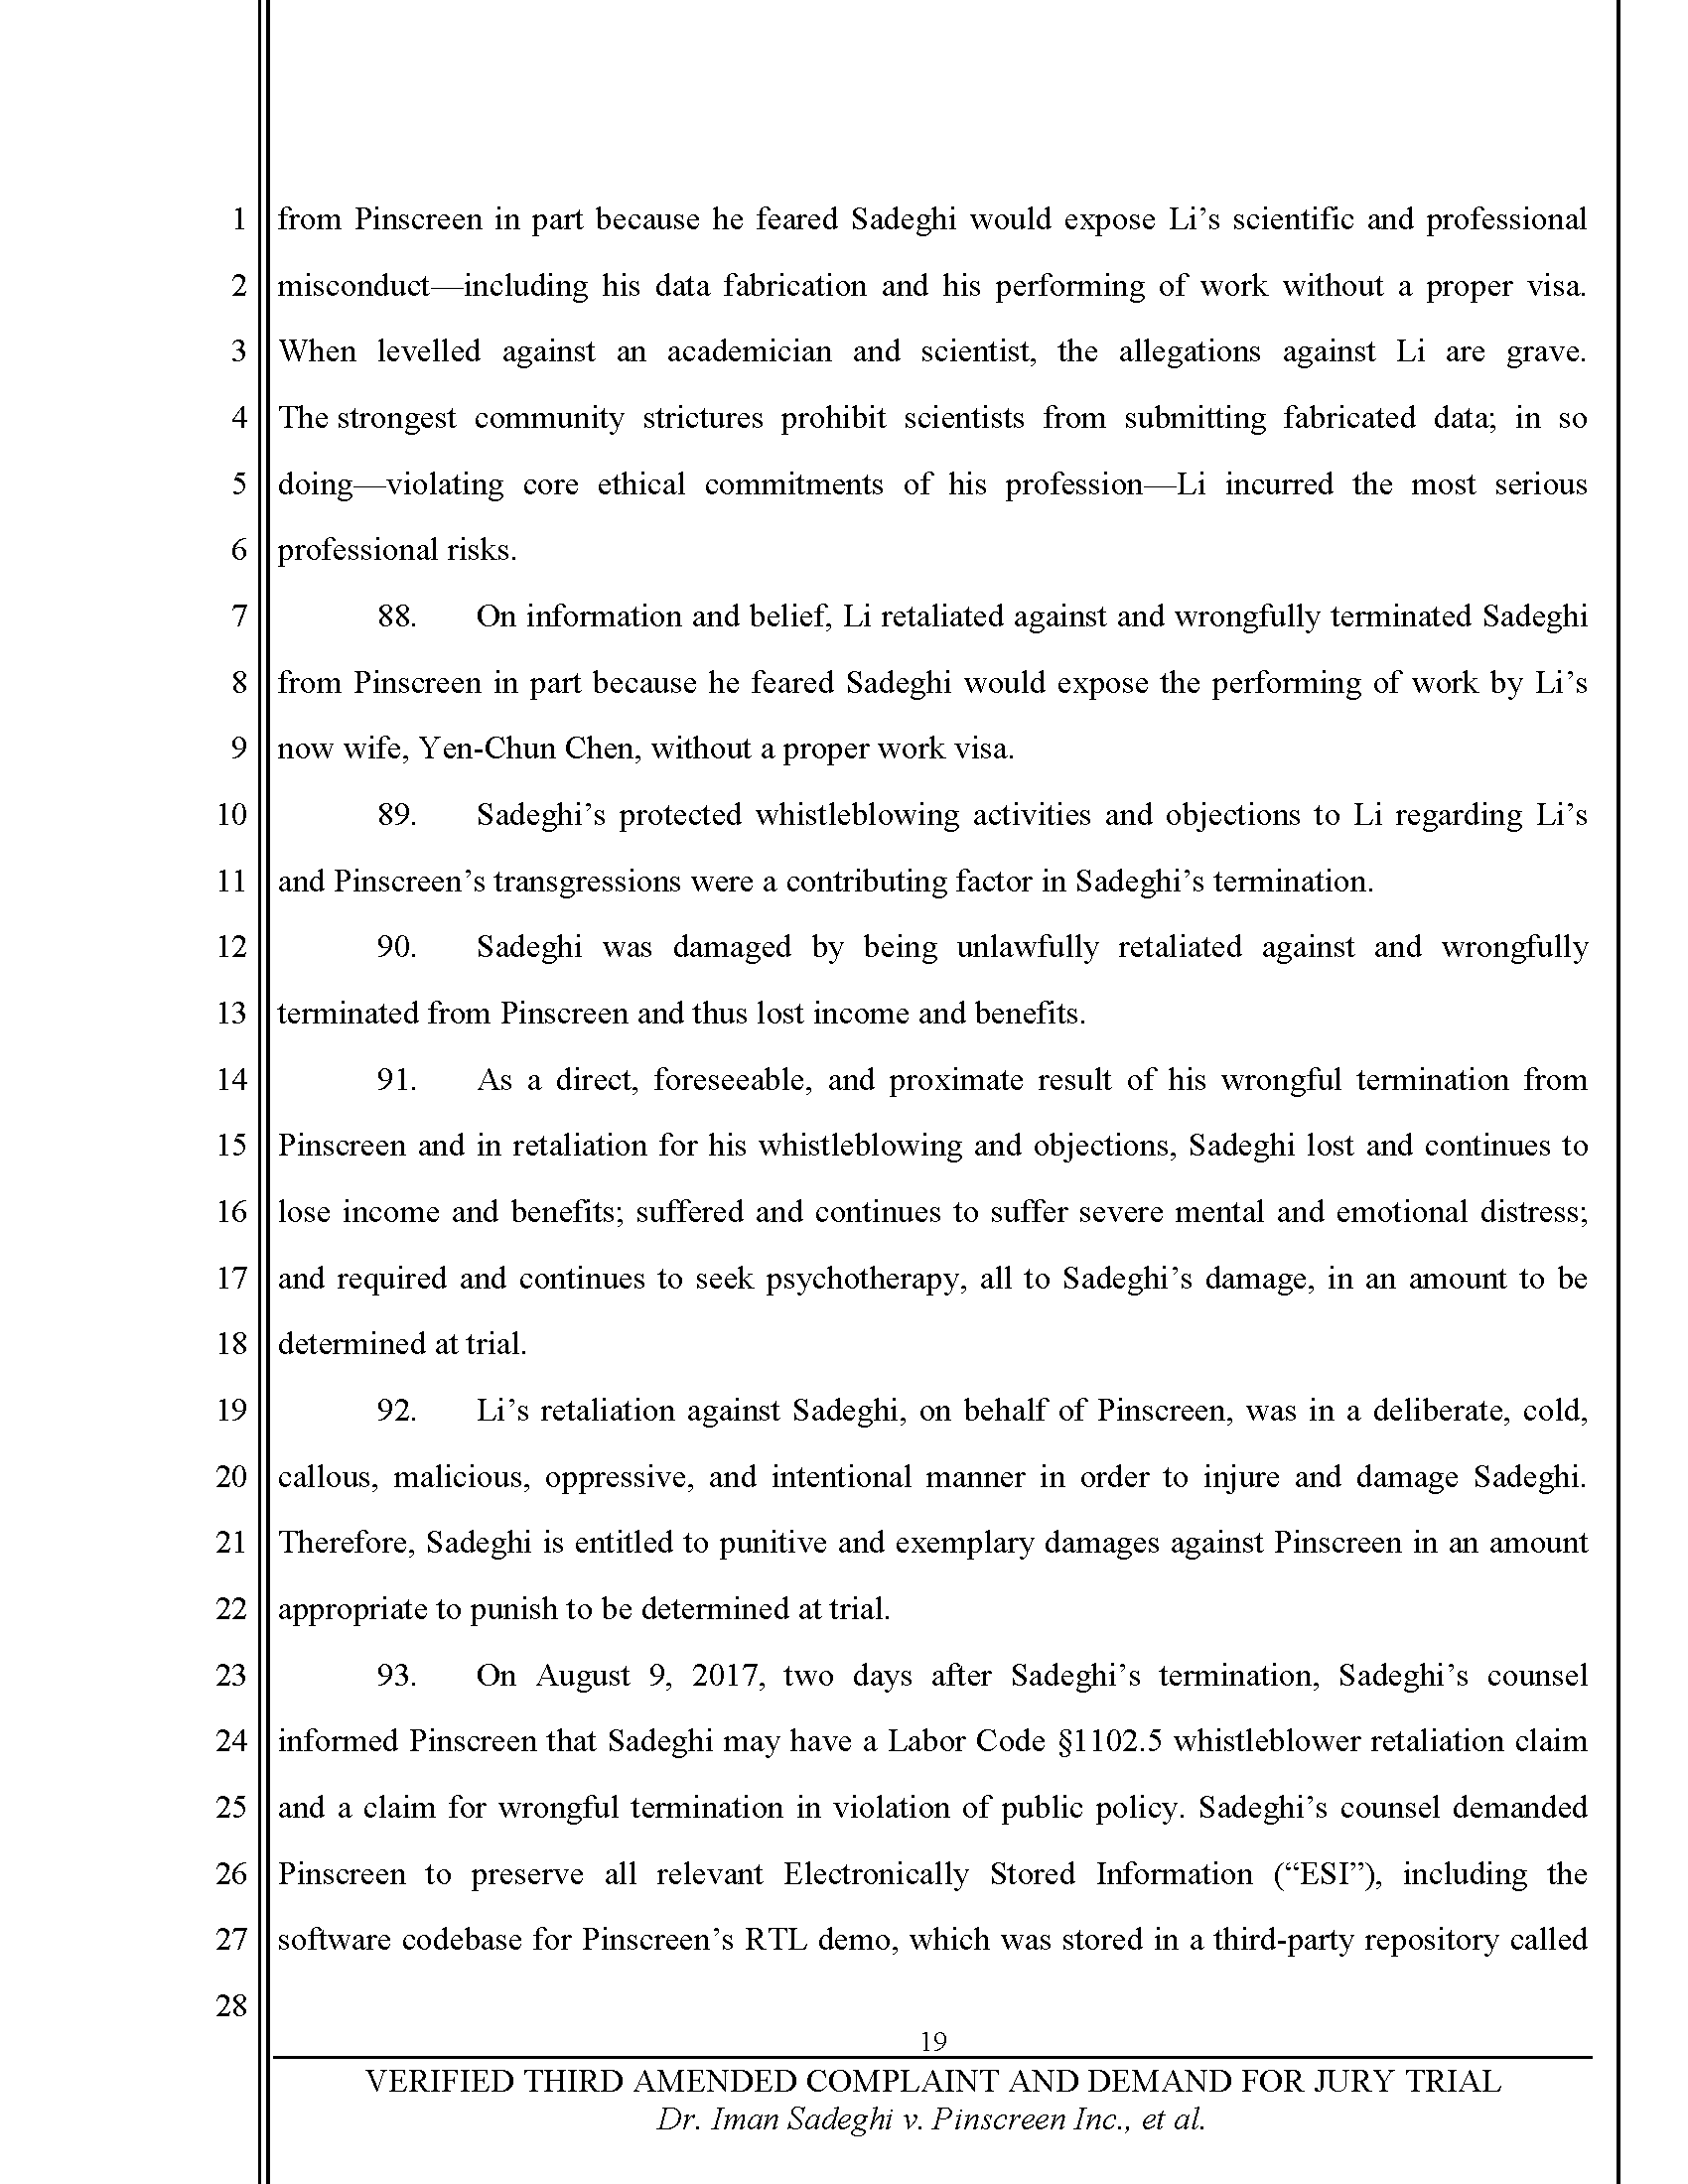 Third Amended Complaint (TAC) Page 20